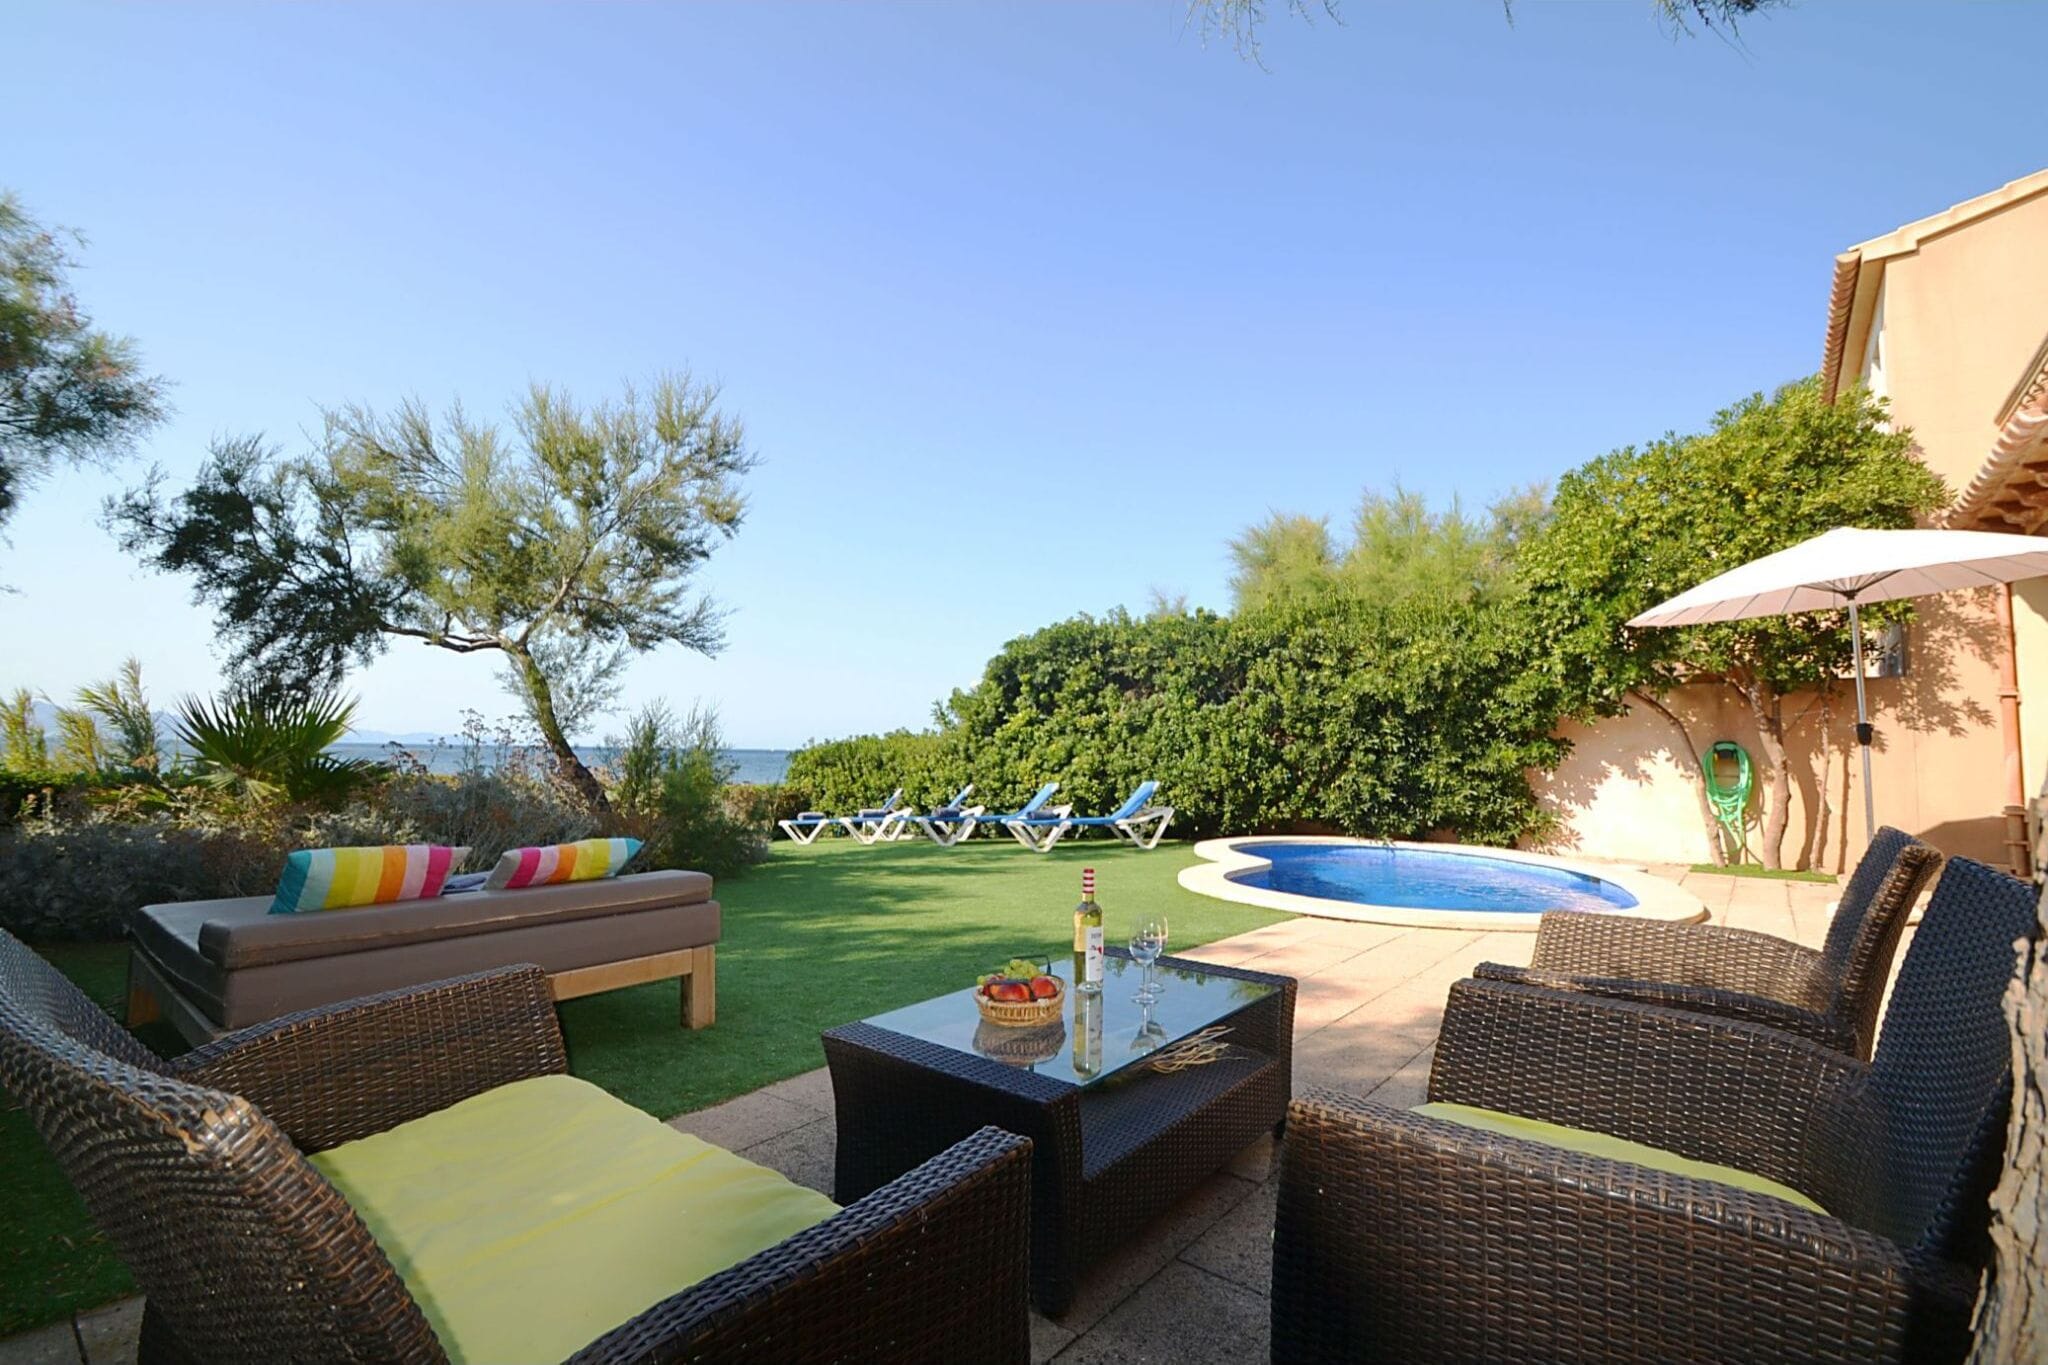 Fun, connected holiday home just 200m from wide sandy beach on Mallorca